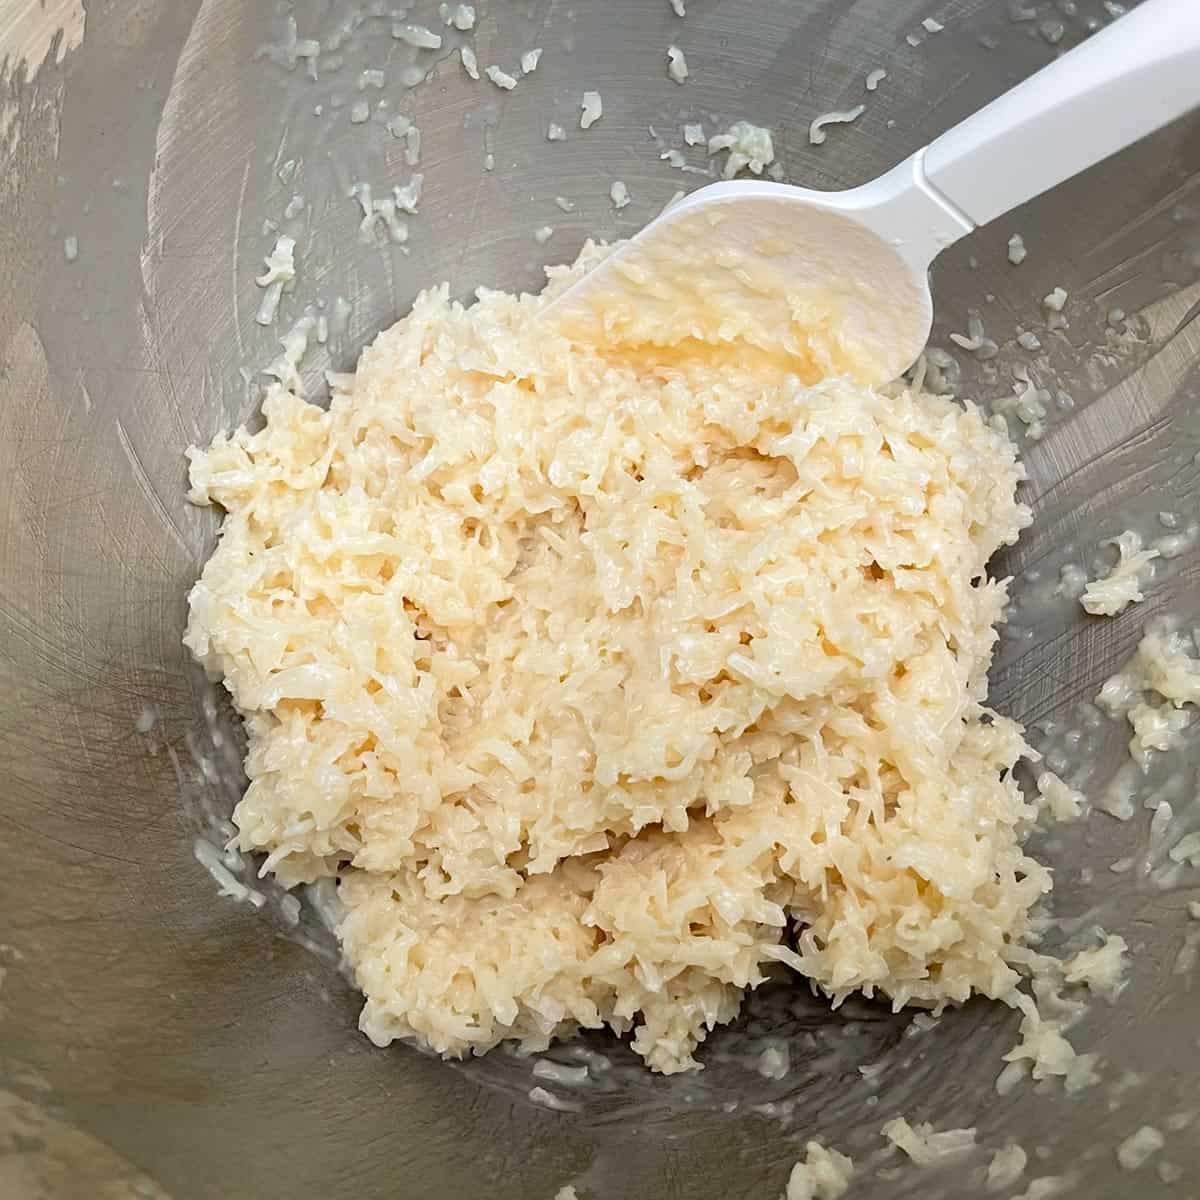 Coconut macaroon ingredients all mixed in mixer bowl.